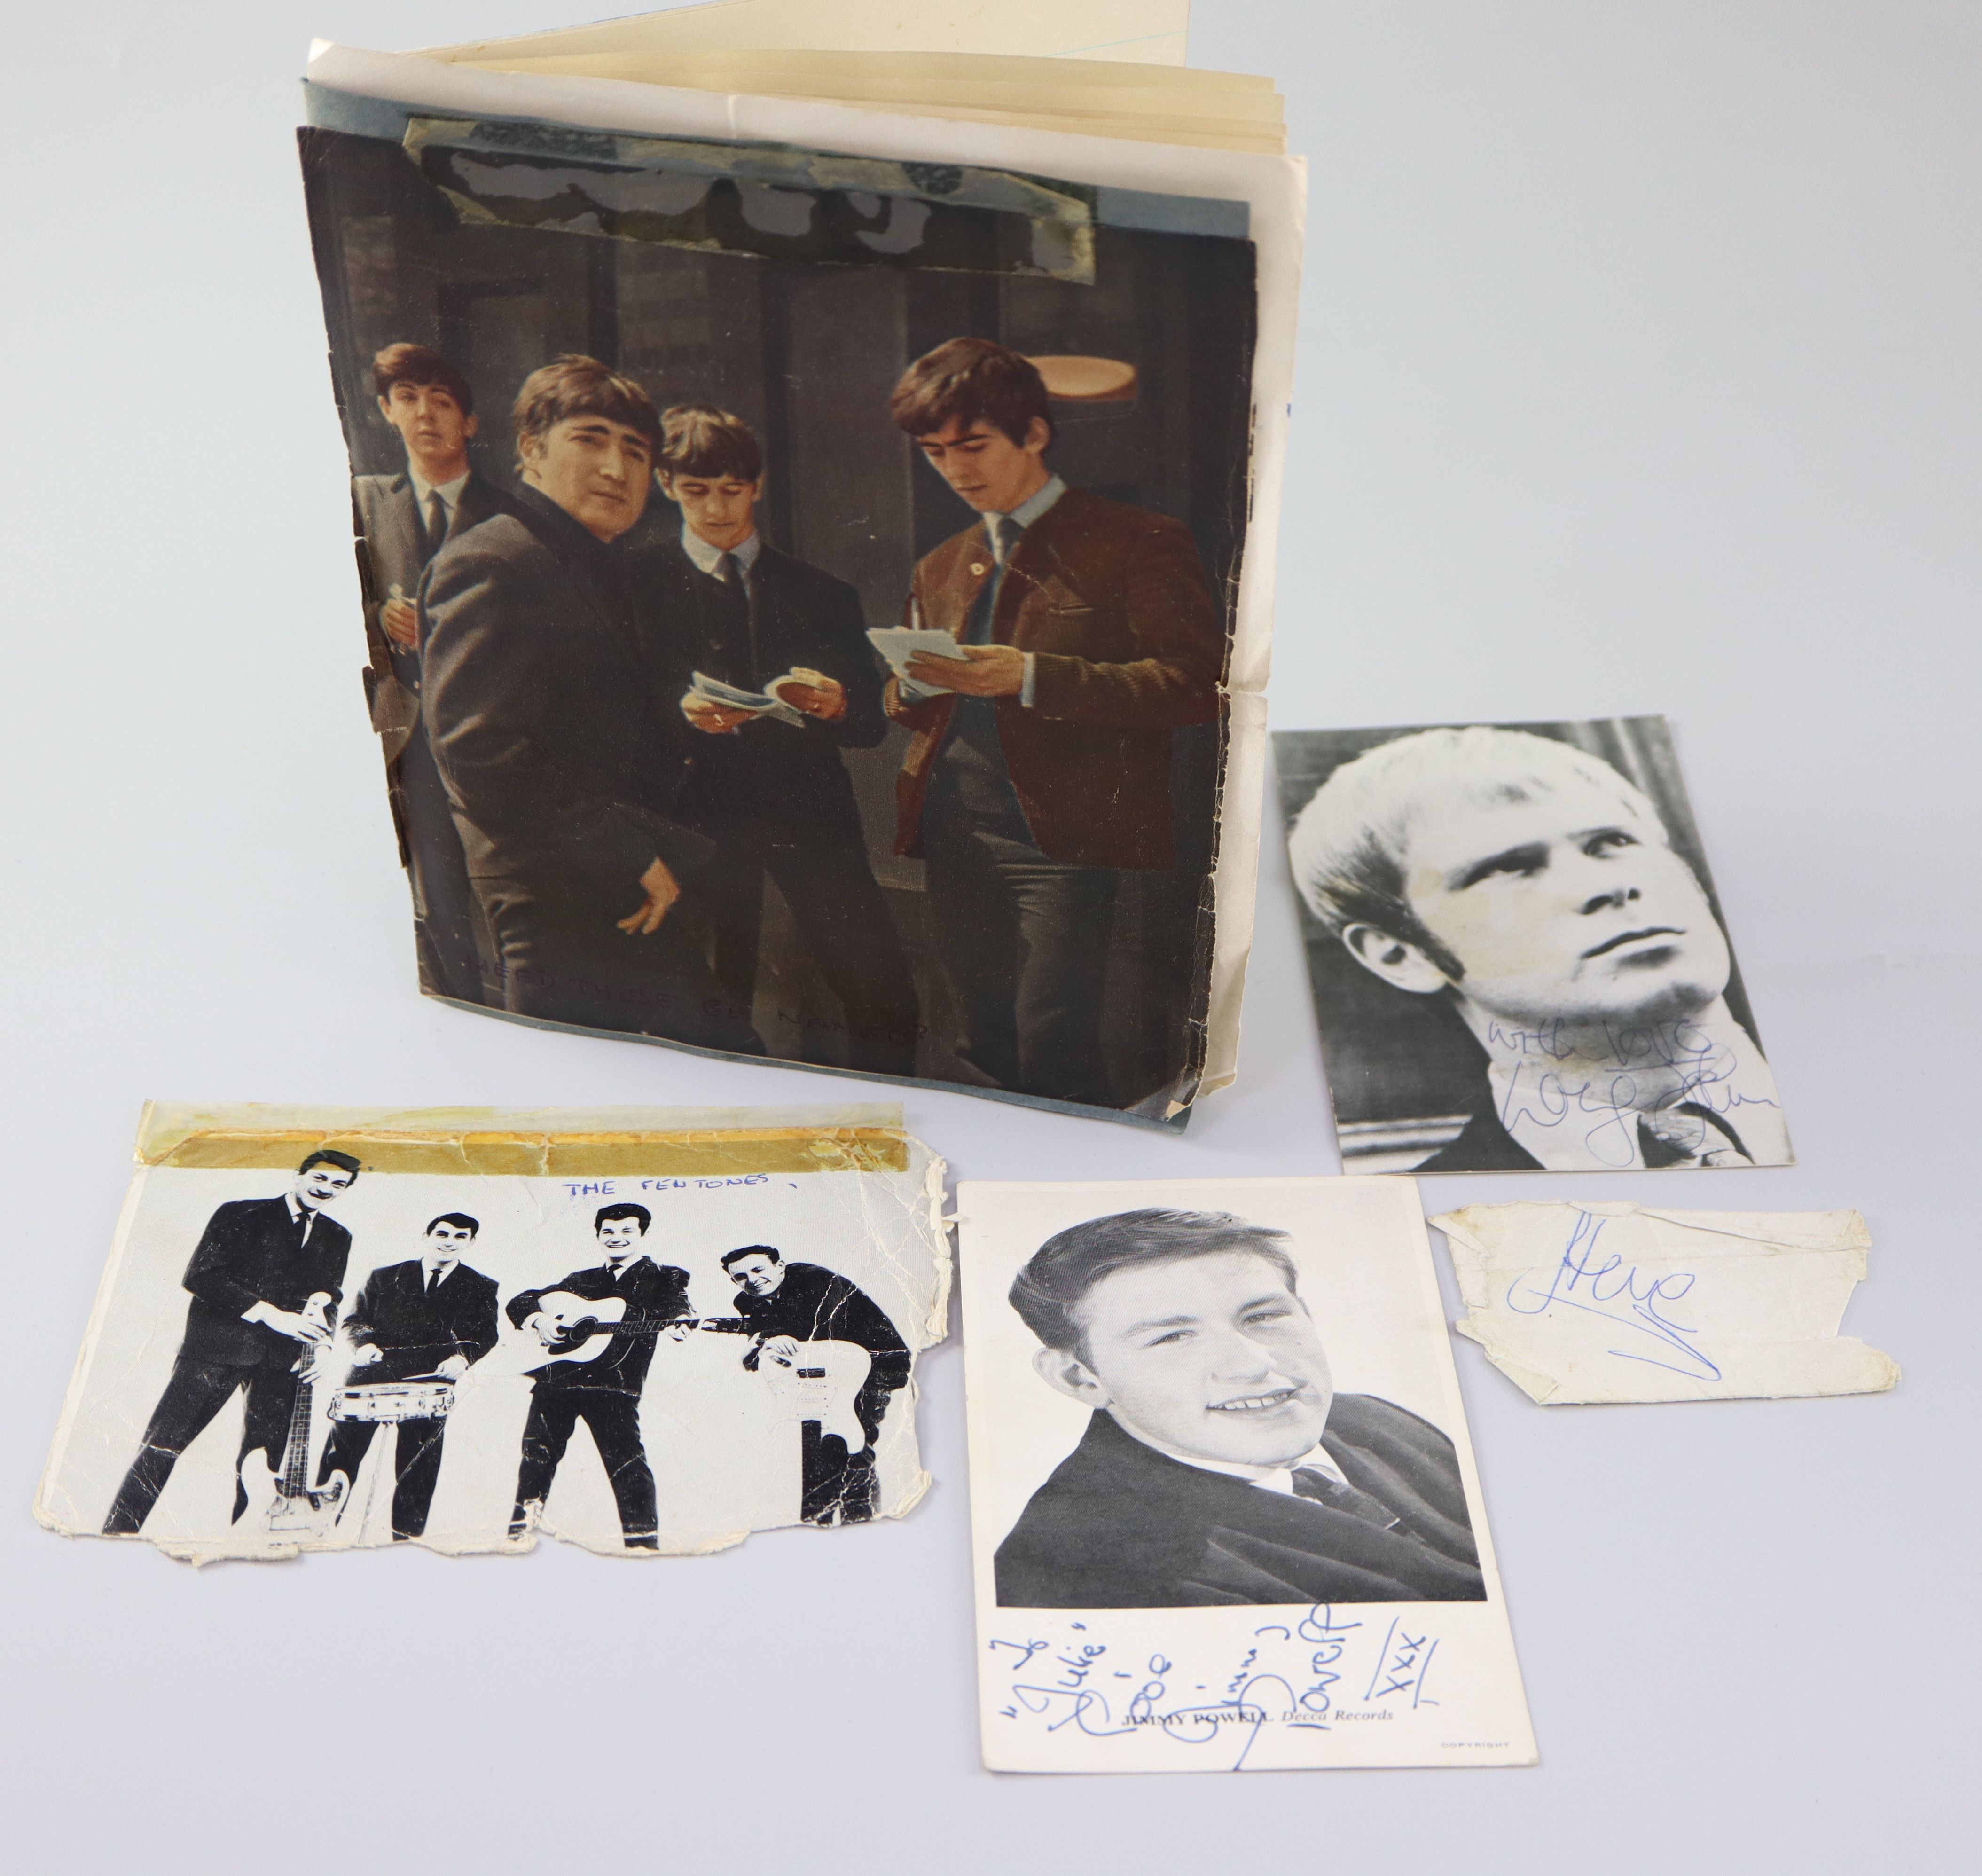 A 1960s album of rock musicians autographs including two sets of The Rolling Stones (includes Brian Jones), Johnny Kidd, c.1963-65